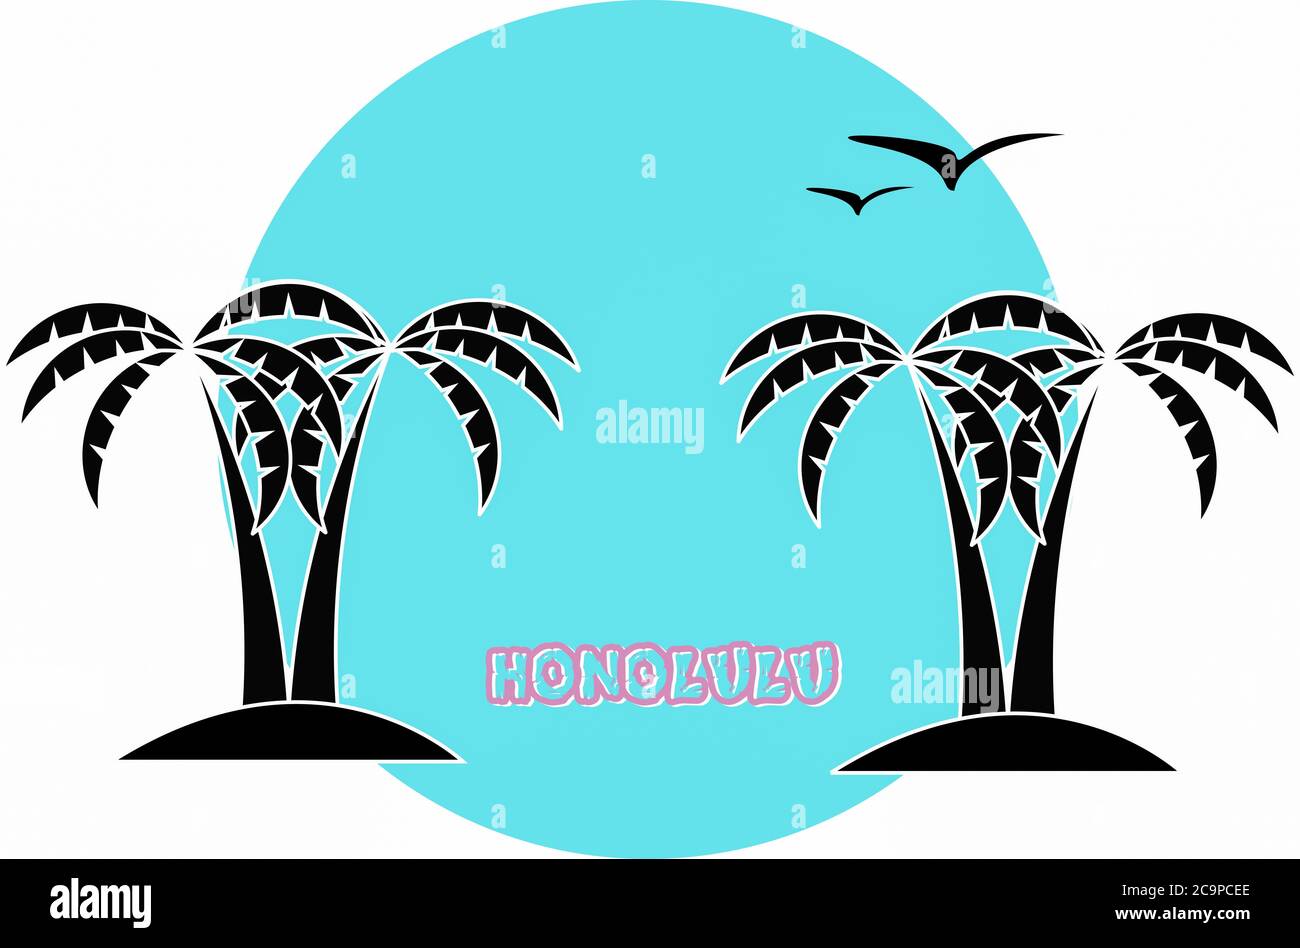 Stylized palm trees silhouettes and seagulls with Honolulu writing. Stock Photo